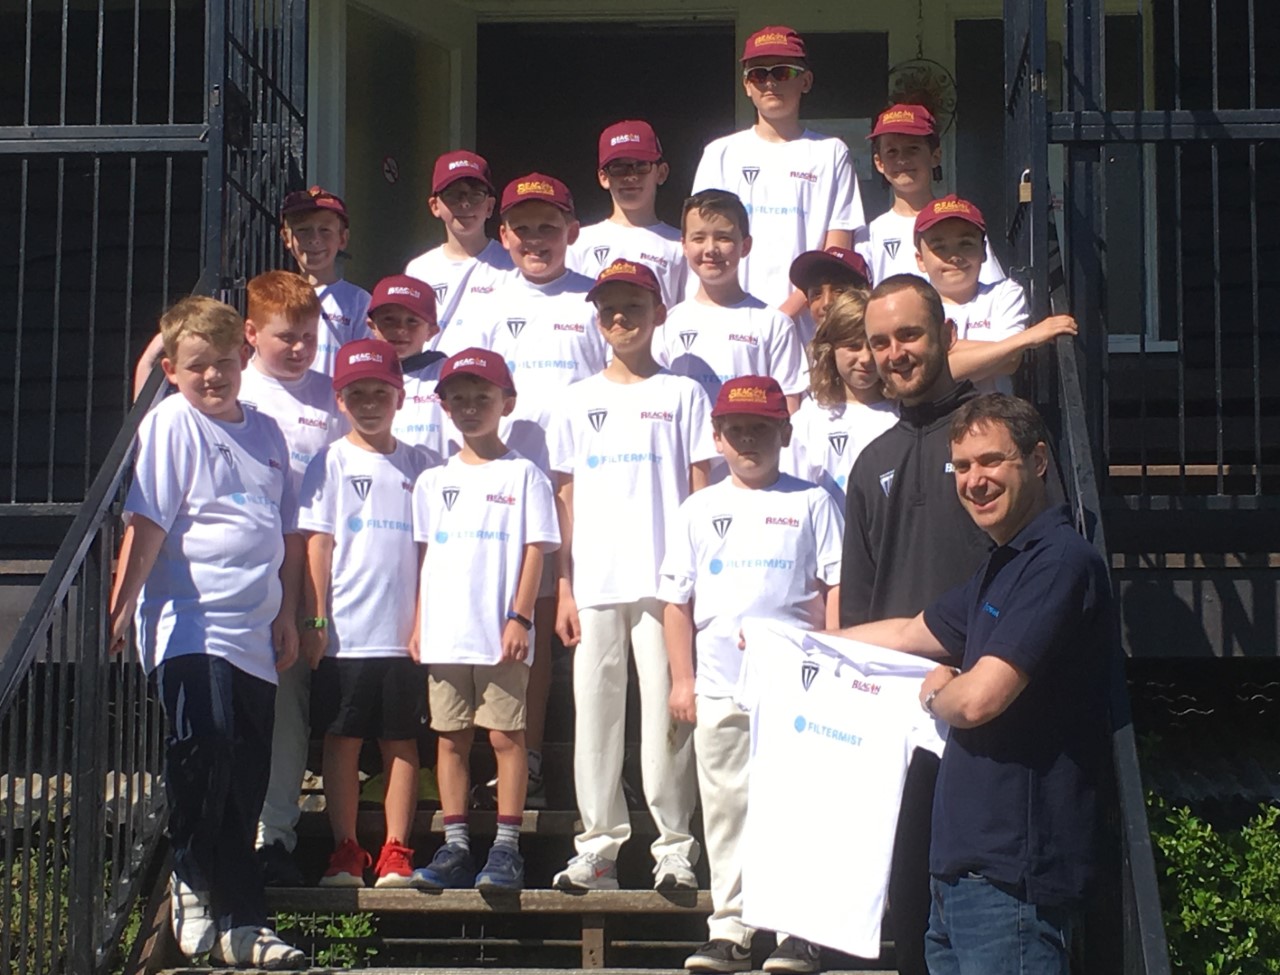 Under 11 Sparks squad is bowled over by support from Filtermist